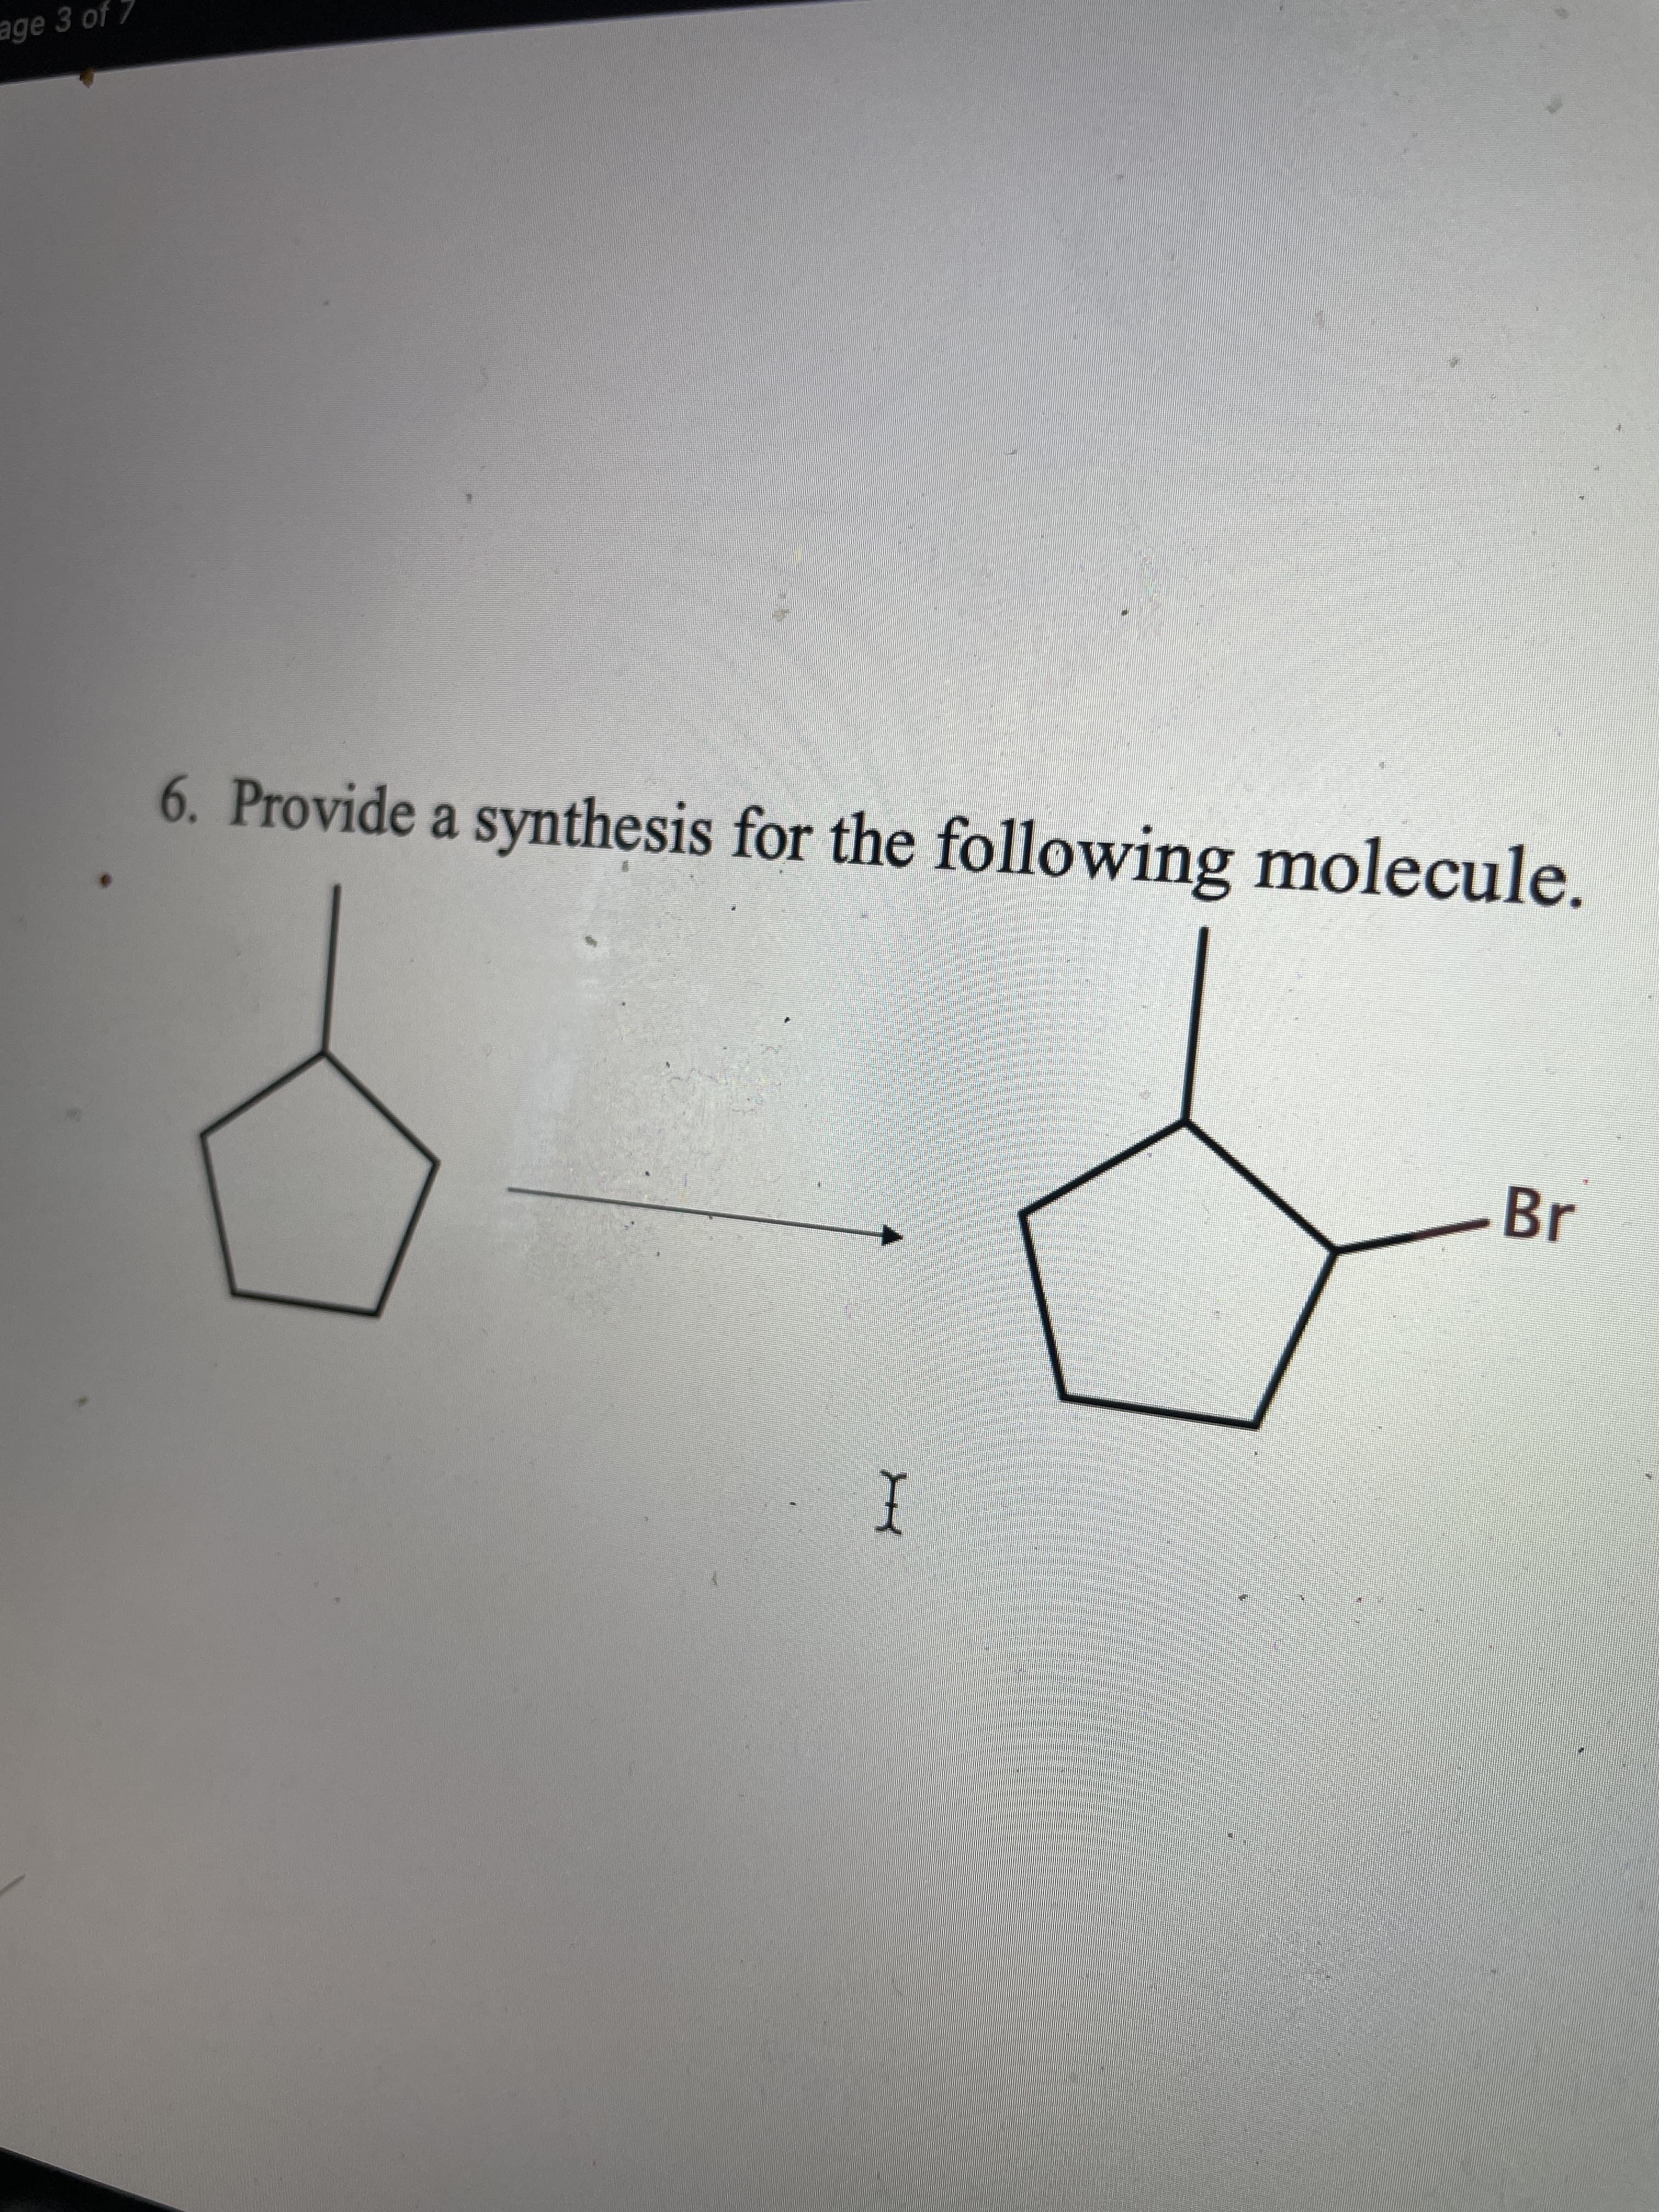 age 3 of
6. Provide a synthesis for the following molecule.
I
